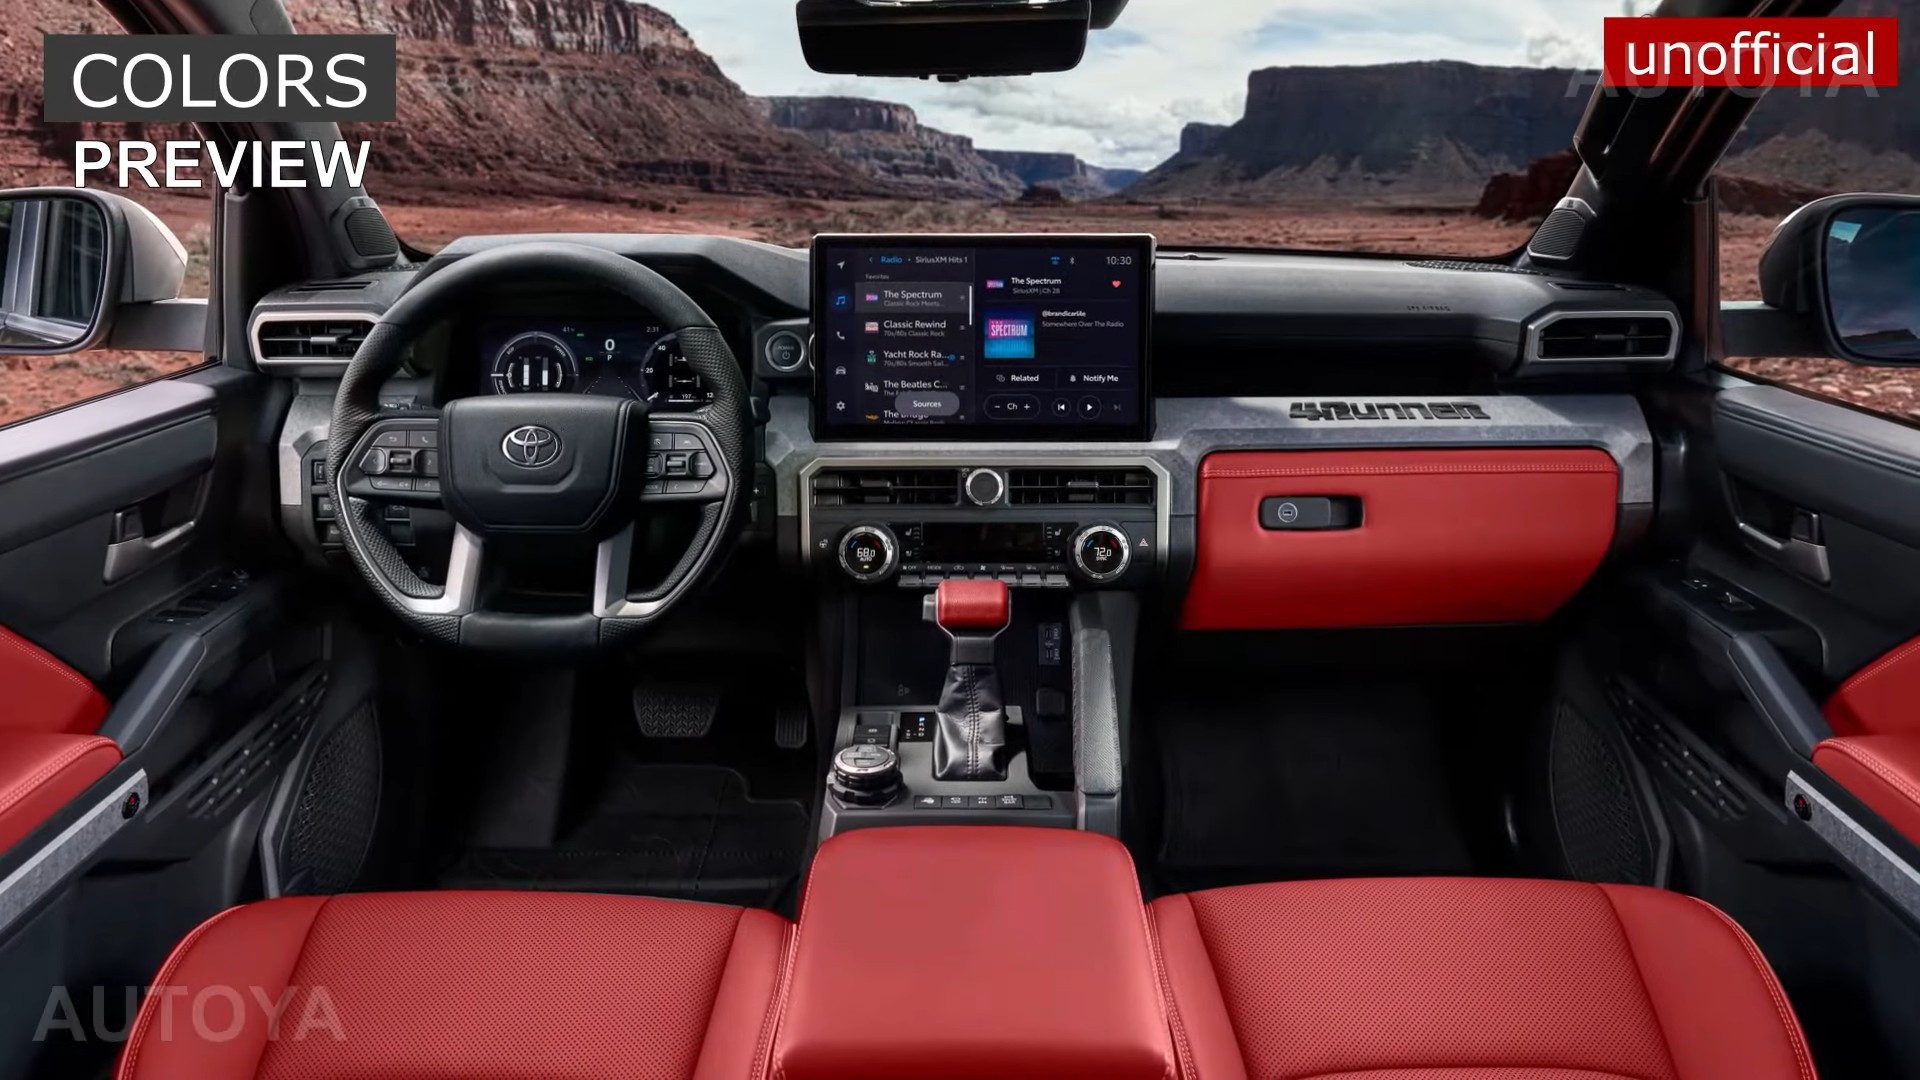 2025 Toyota 4runner Trd Pro Revealed From Inside Out Way Ahead Of Its Official Time 15 